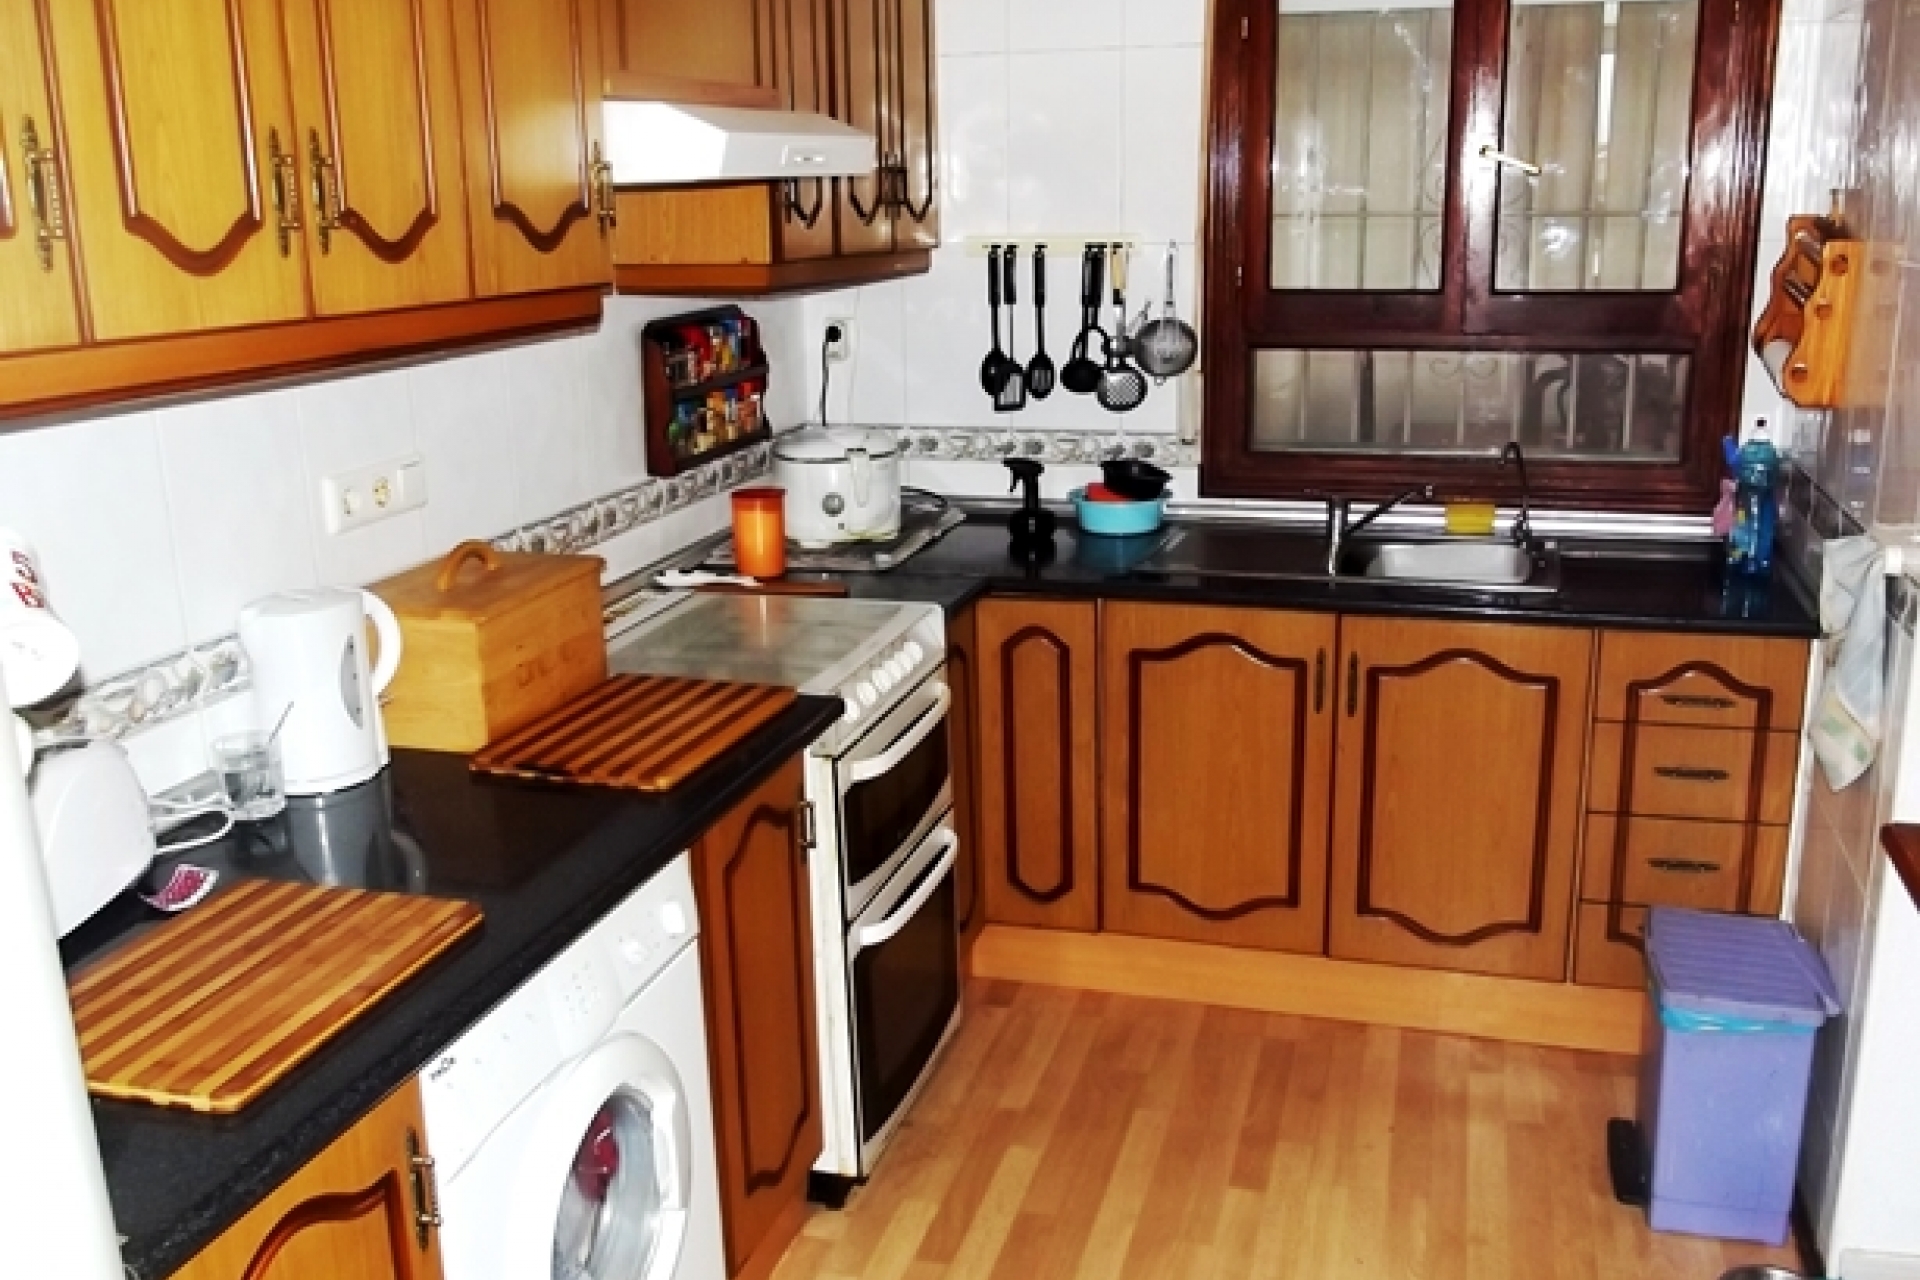 Ciudad Quesada near Guardamar and Torrevieja, cheap, bargain property for sale on Spains Costa Blanca.